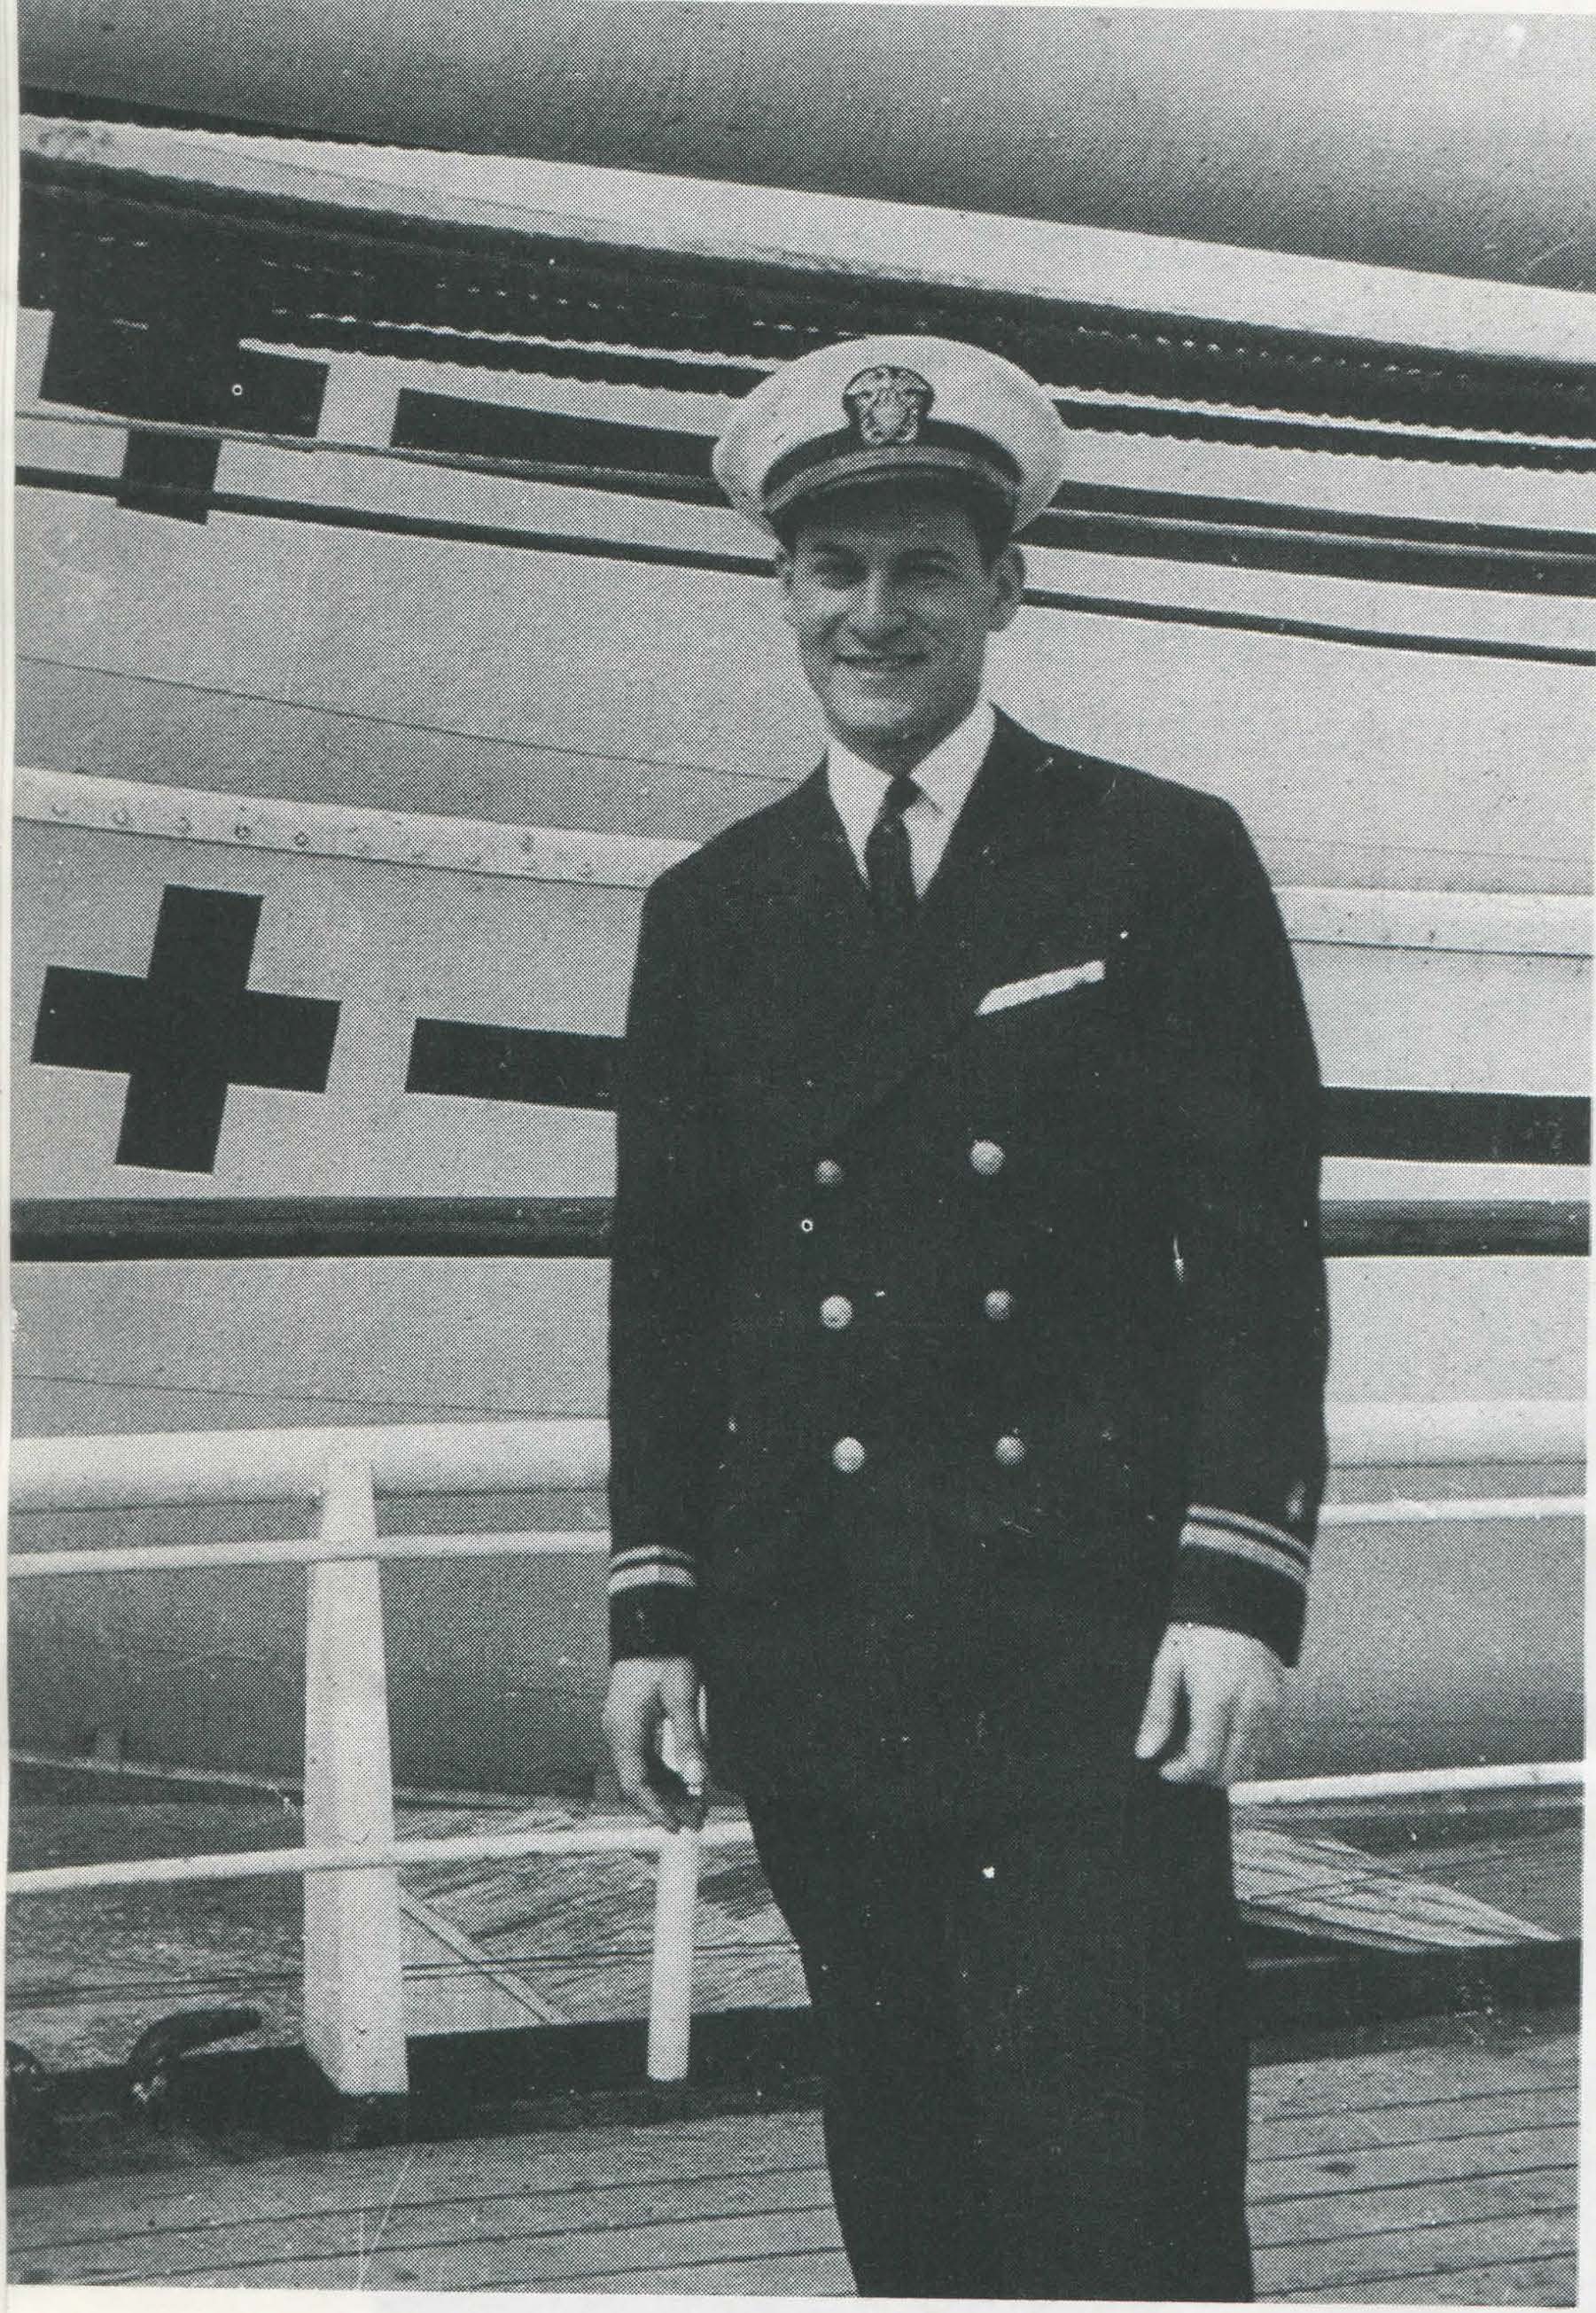 Dr. Heimlich in front of the hospital ship Repose